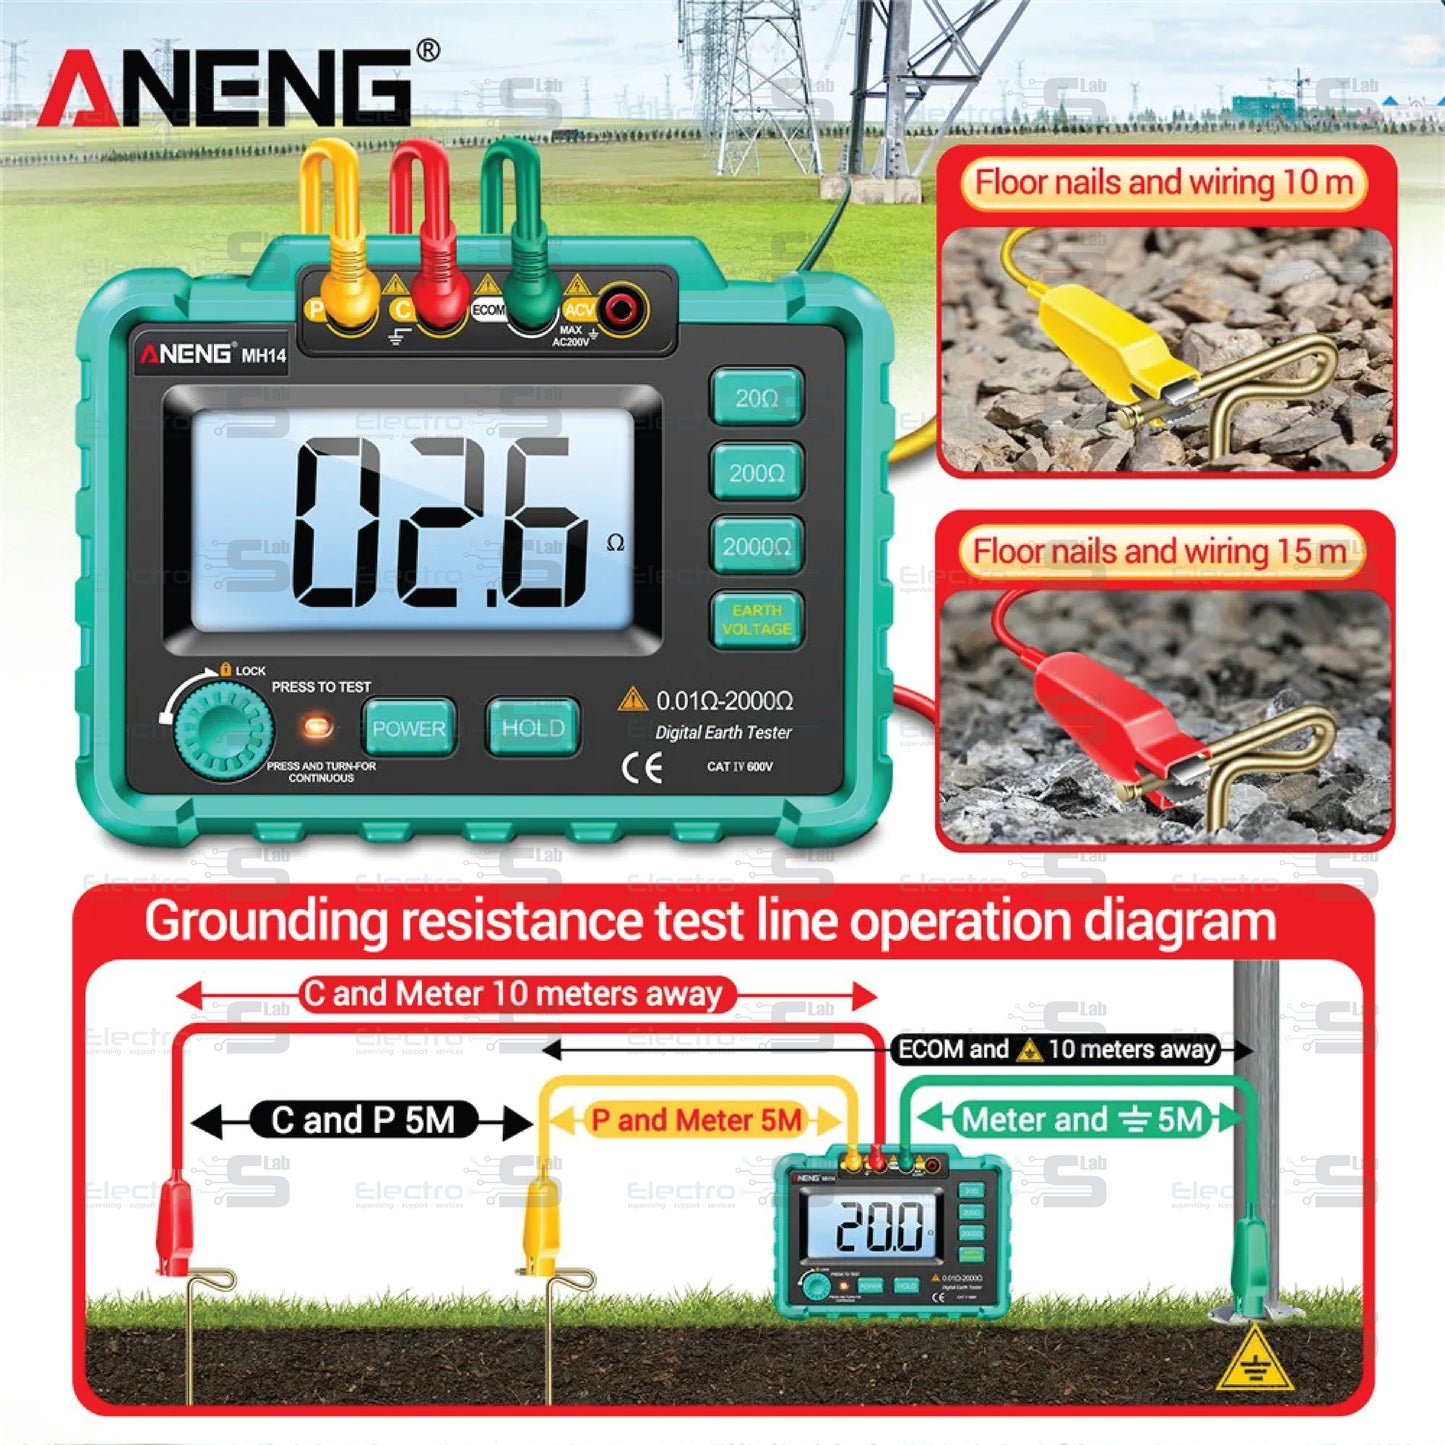 ANENG MH14 Ground Resistance Tester